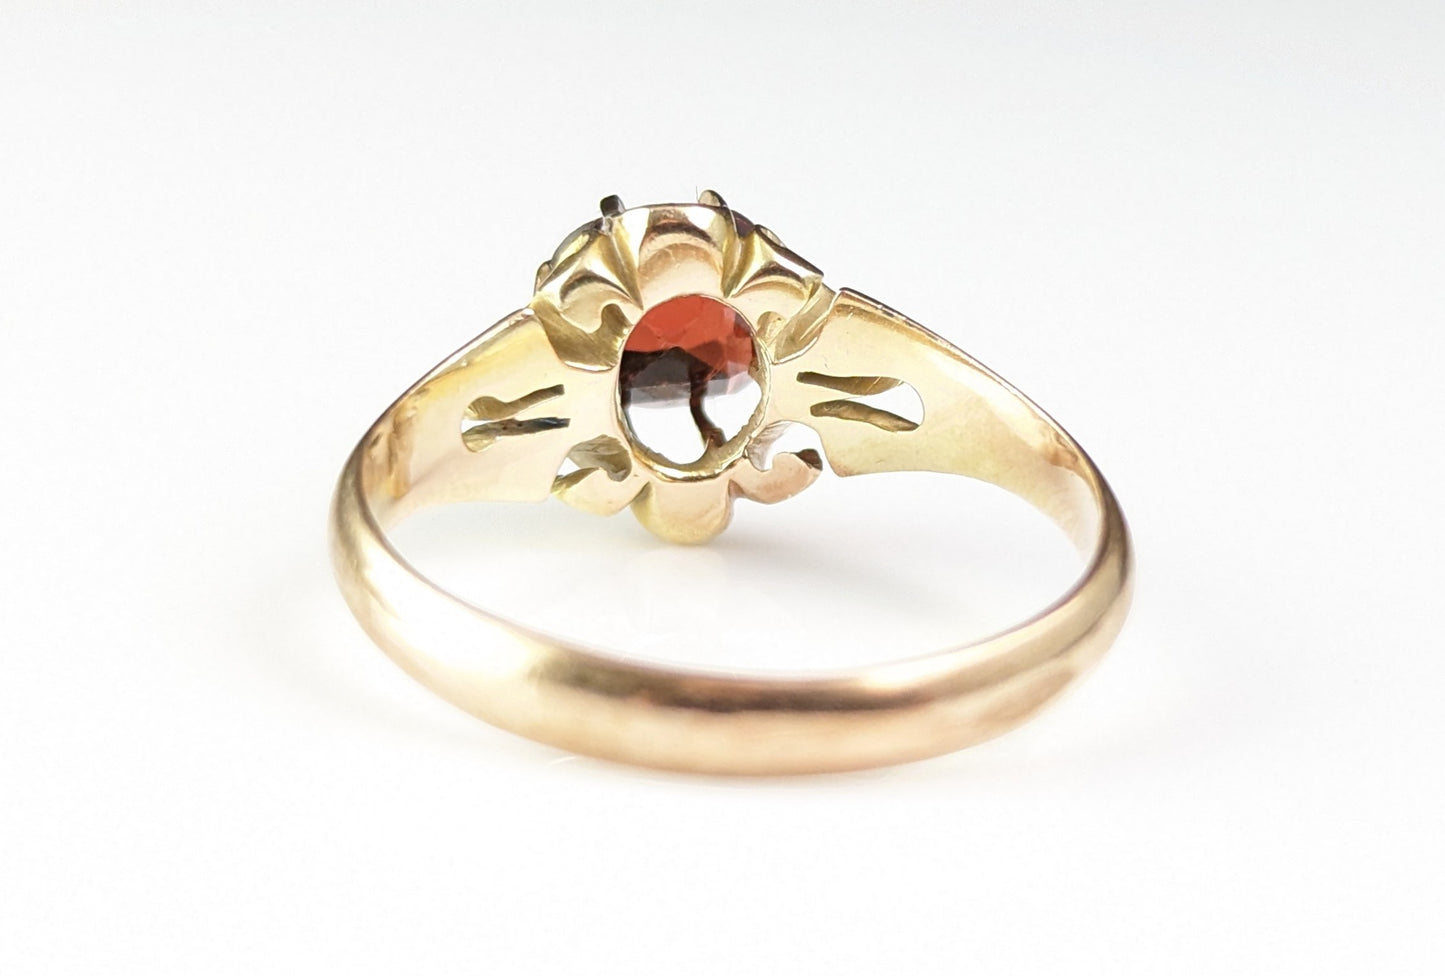 Vintage Garnet solitaire ring, 9ct yellow gold, Art Deco